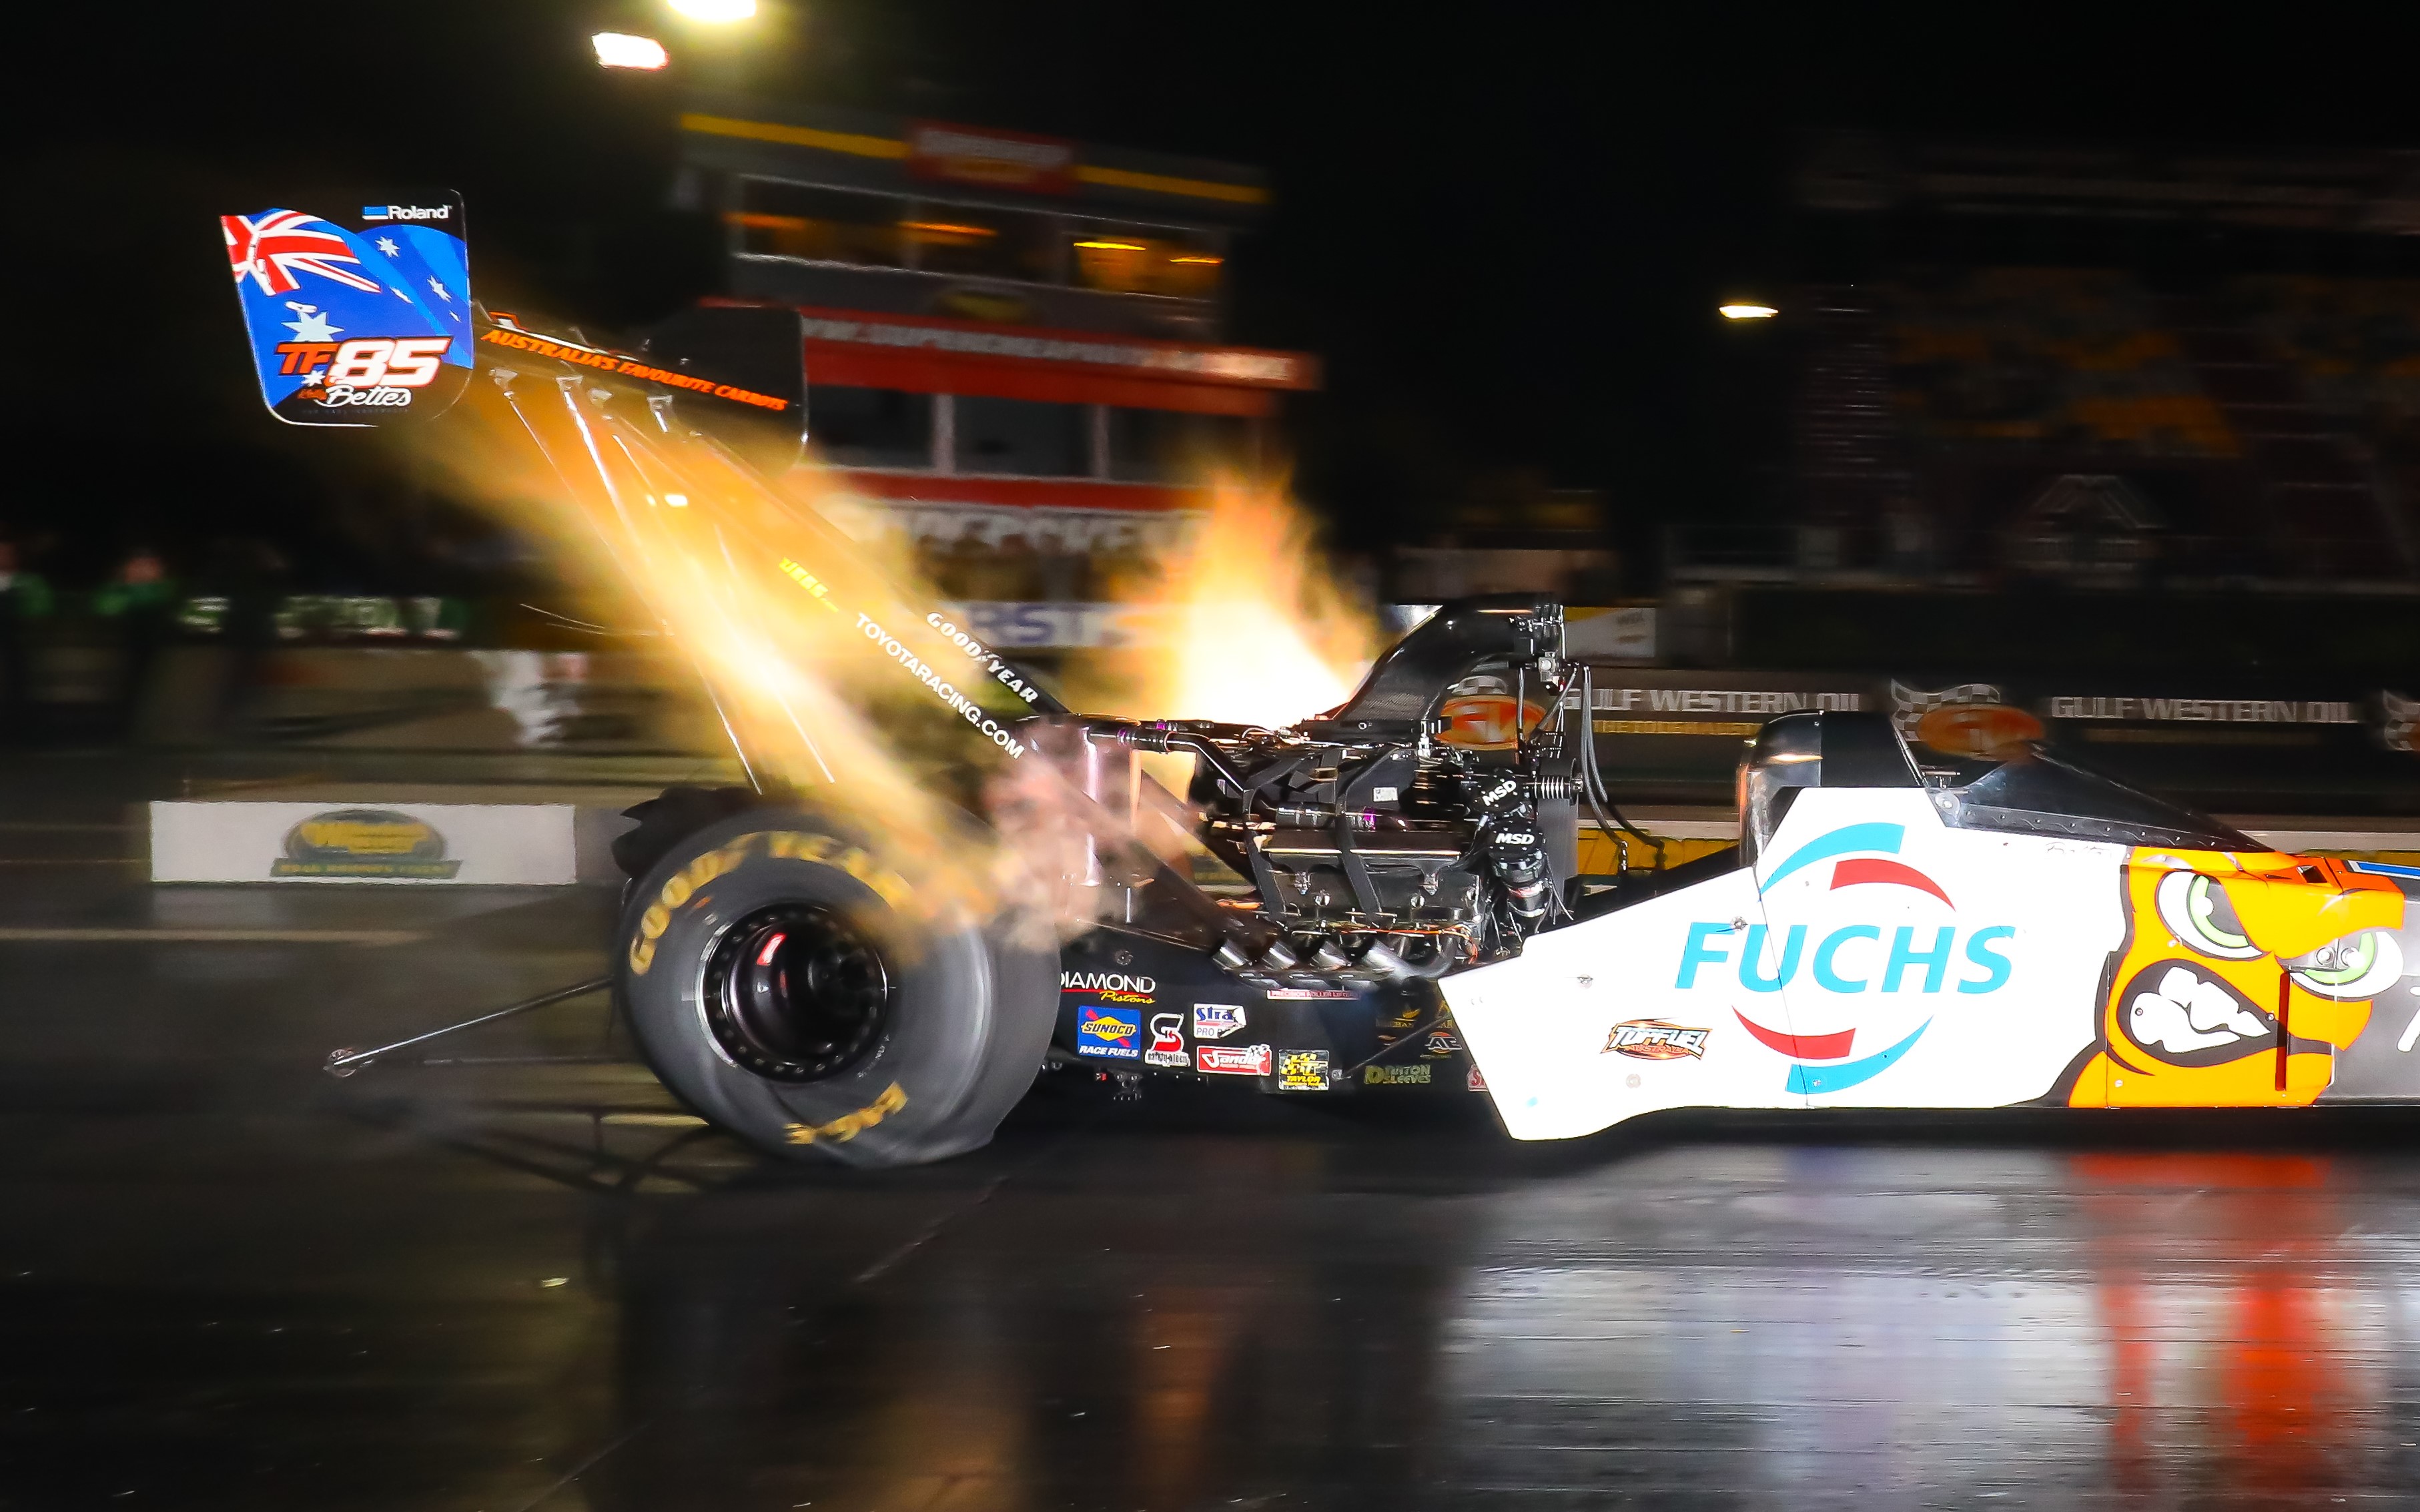 Kelly Bettes was the first ever female to take home the Top Fuel Championship